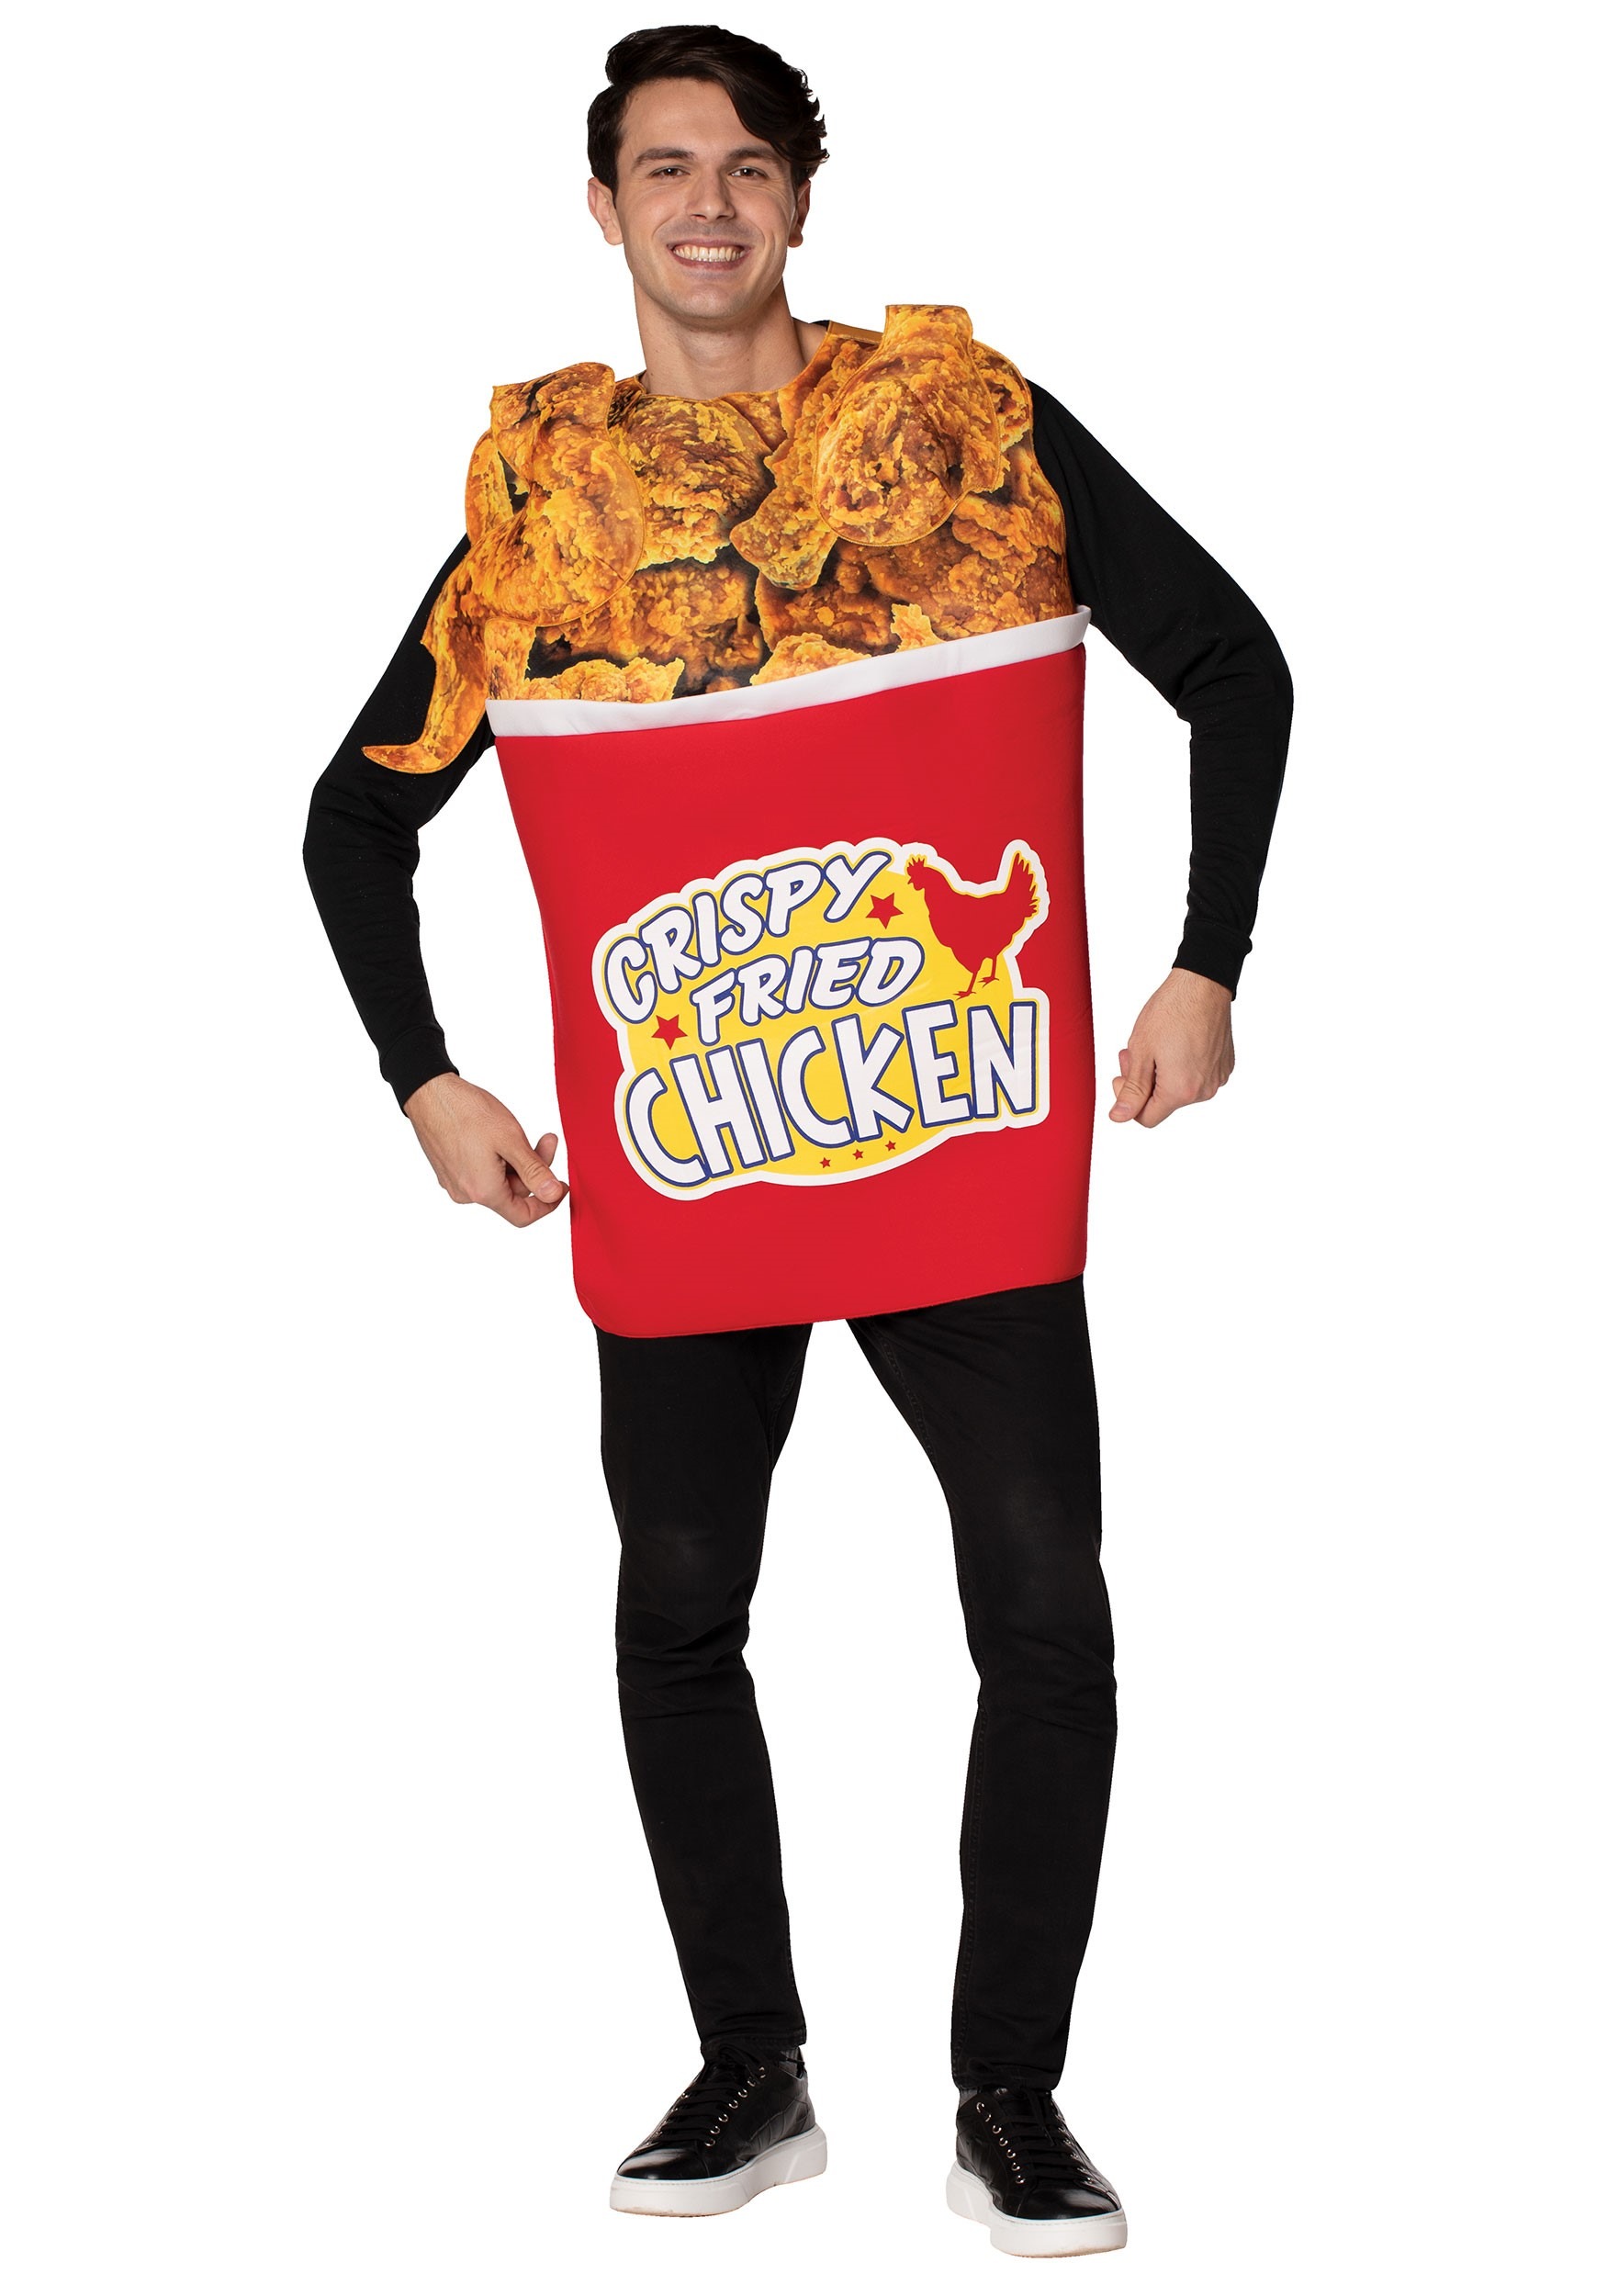 Funny Chicken Costume / Adorable kid in funny bunny costume sitting ...